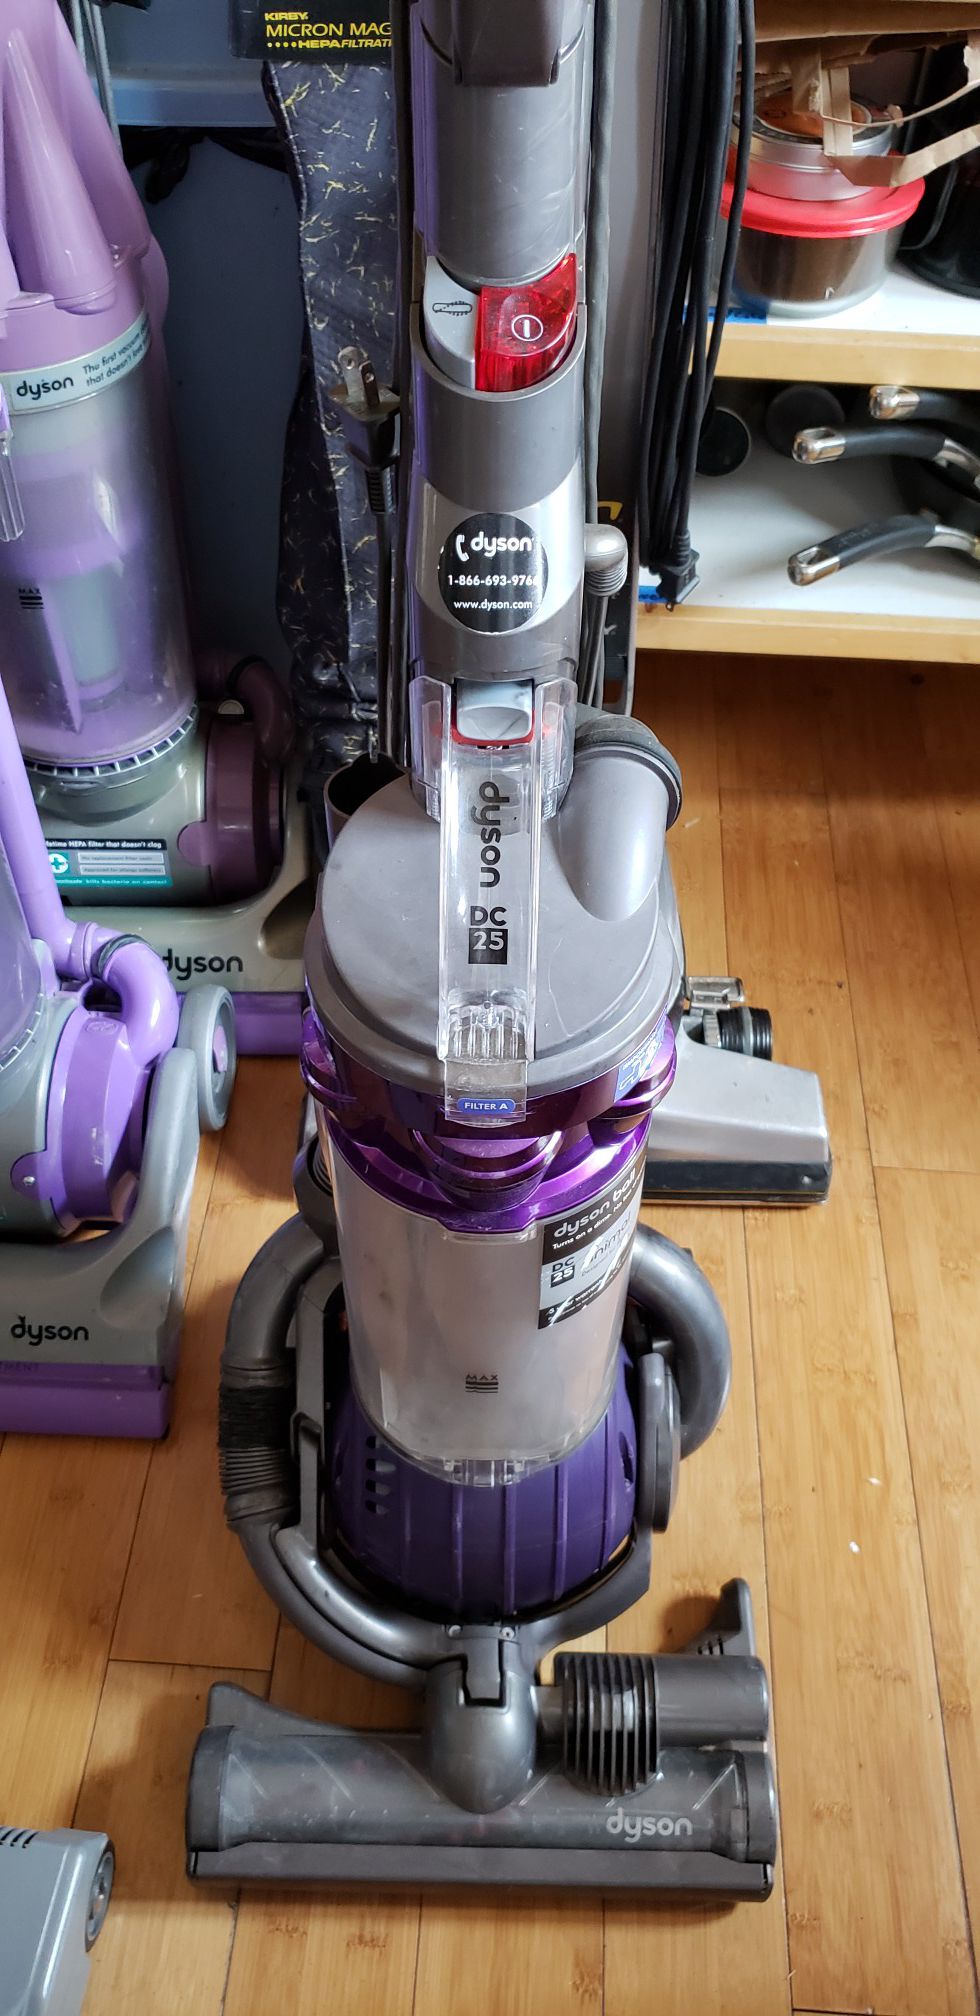 Dyson DC25 Animal Vacuum for Sale in San Jose, CA - OfferUp